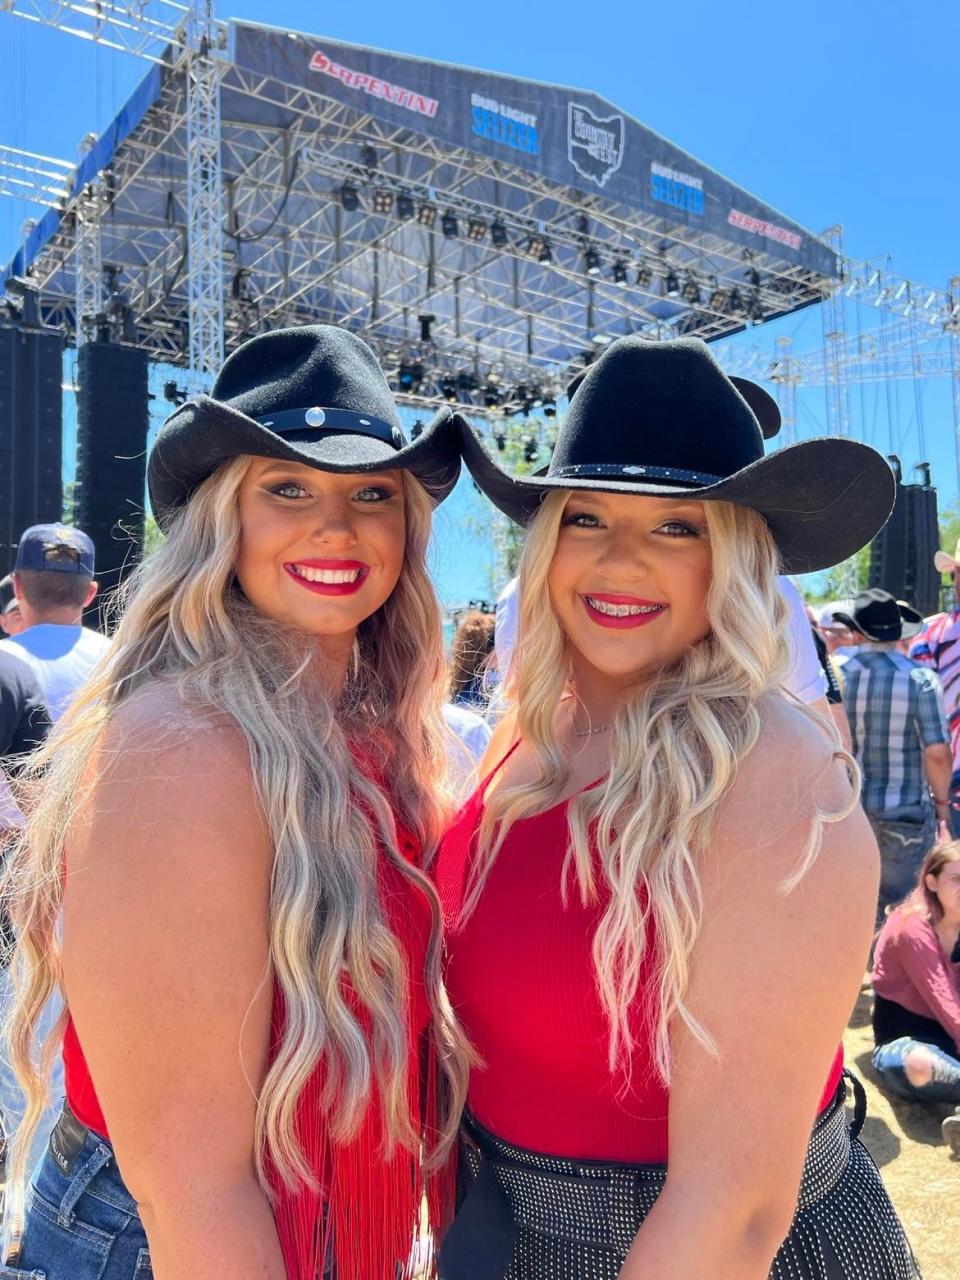 Country Fest fans on Saturday included Karli Smith, 17, left, and Addison Newsome, 16, both of West Virginia.